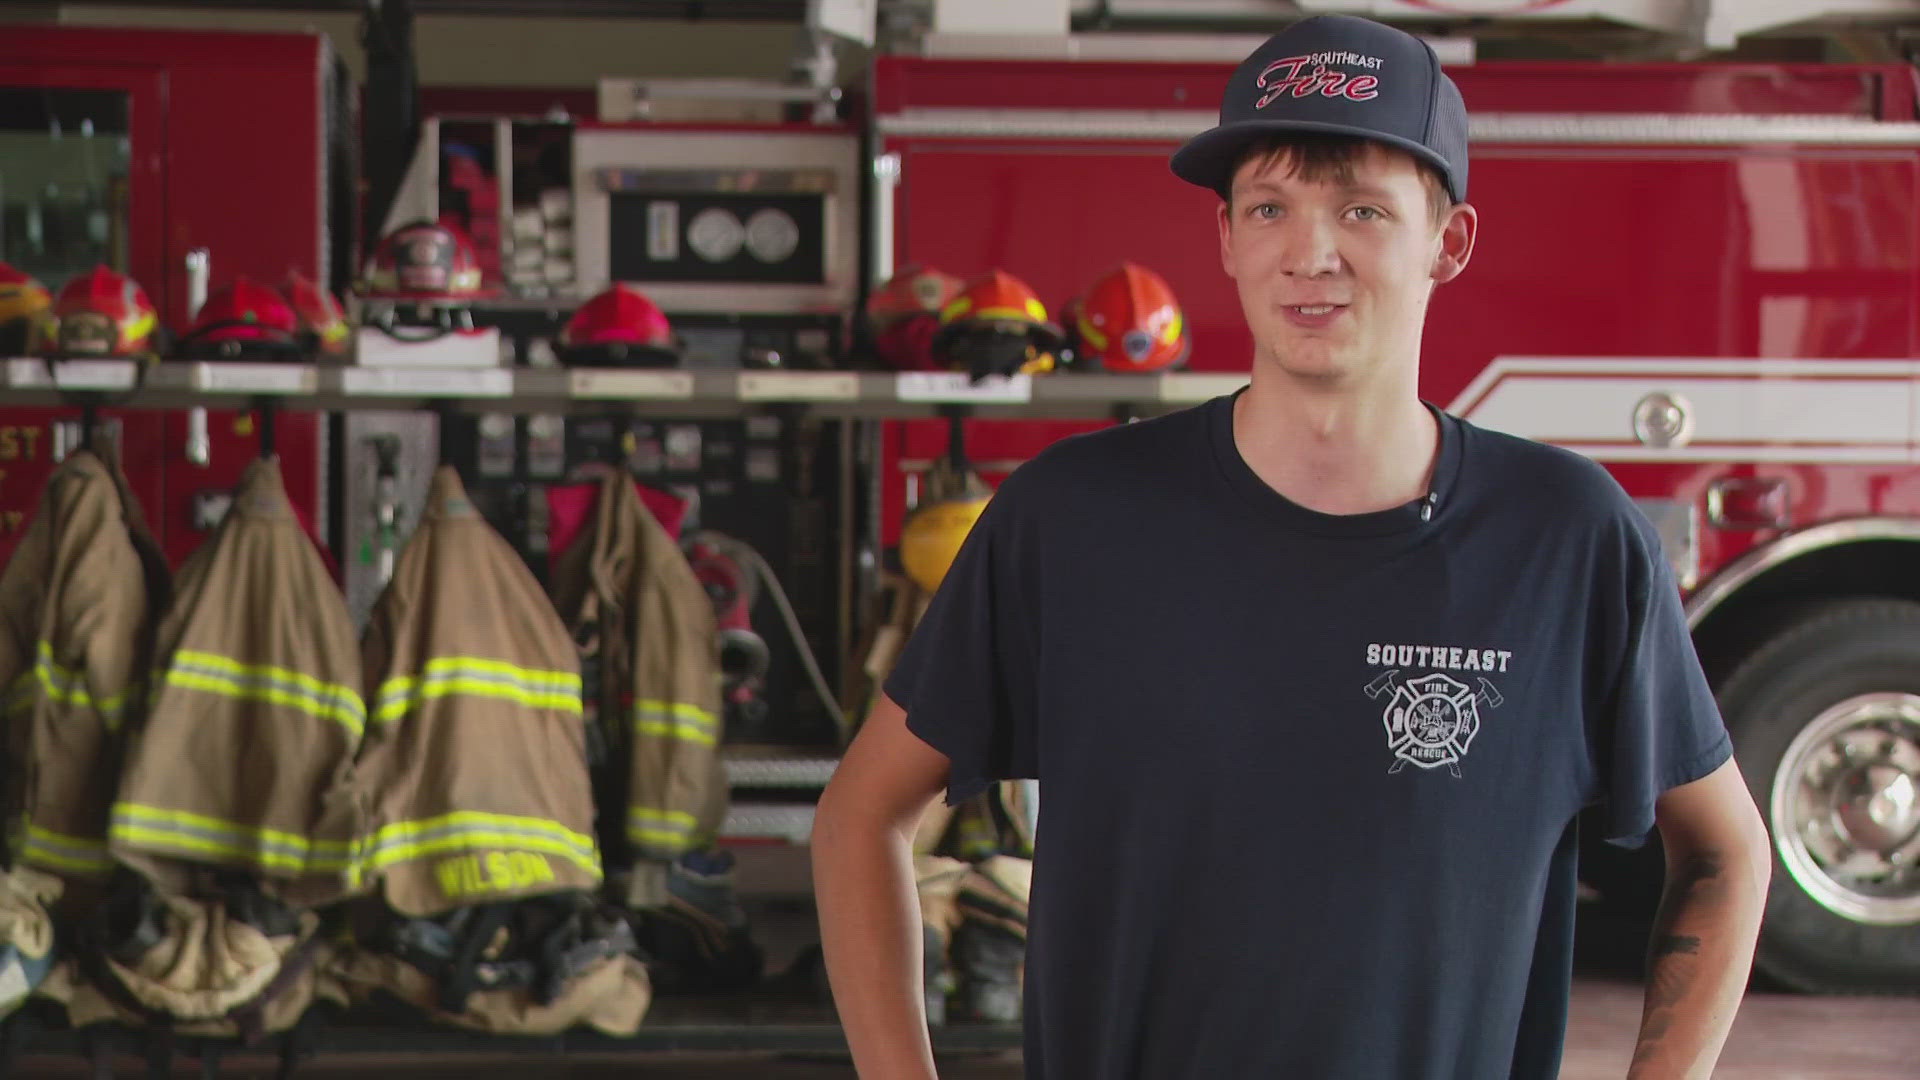 An off-duty Bullitt County firefighter will soon be honored for saving a man's life.